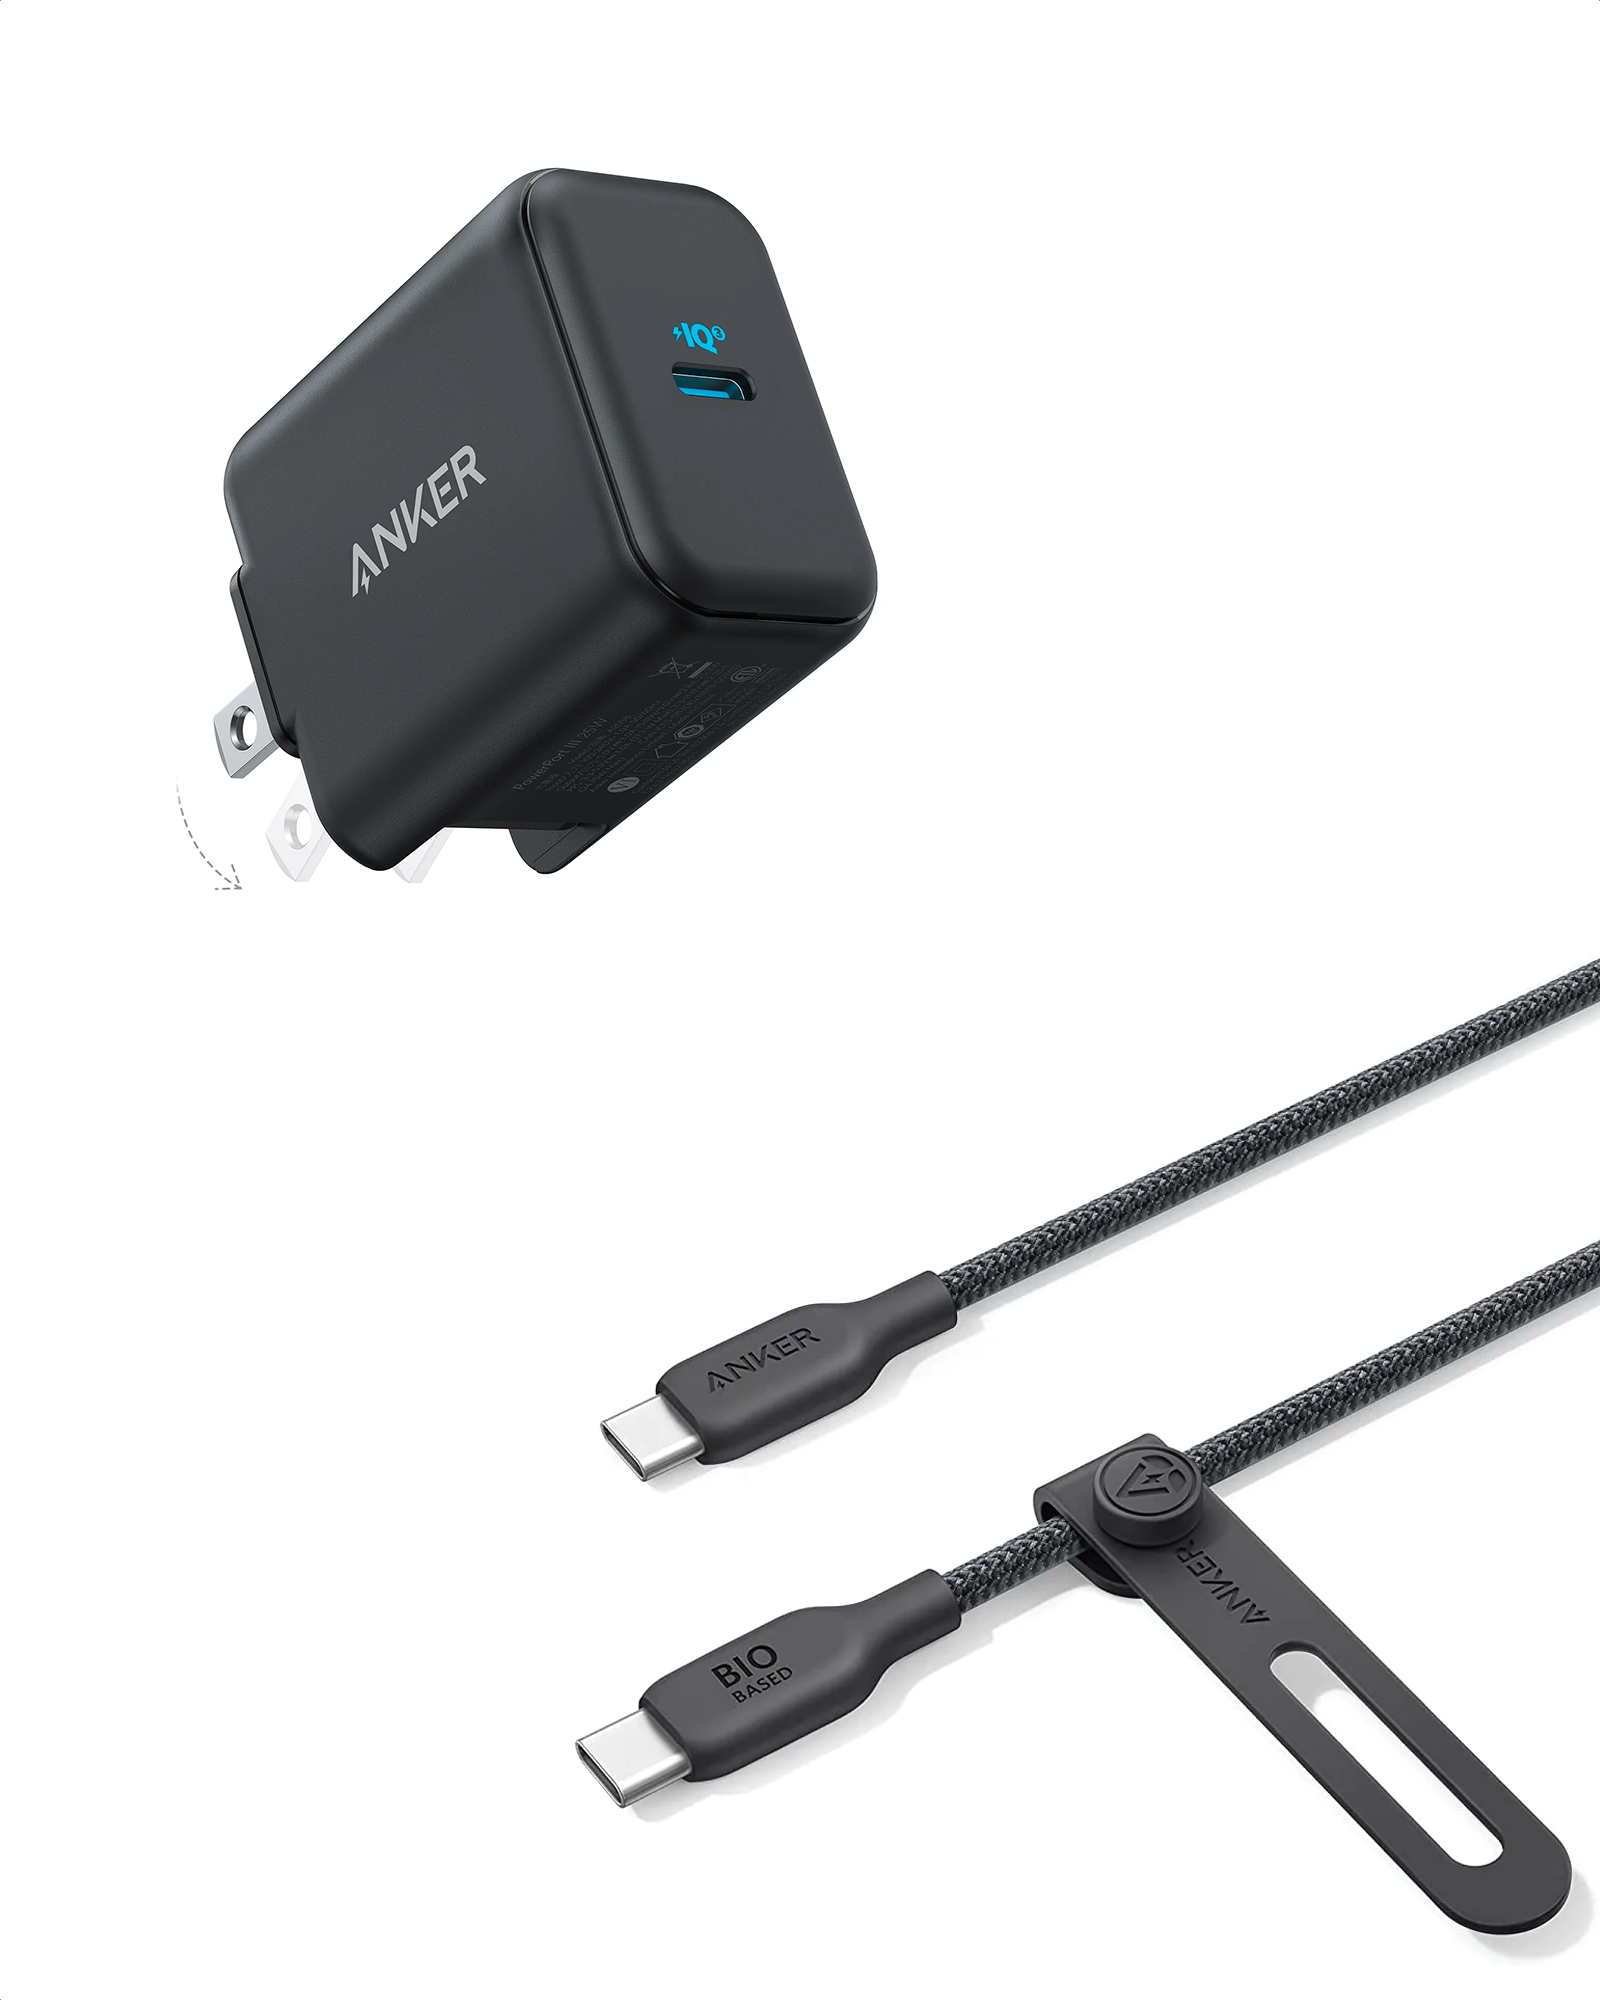 Anker 312 Charger (Ace, 25W) with USB-C to USB-C Cable